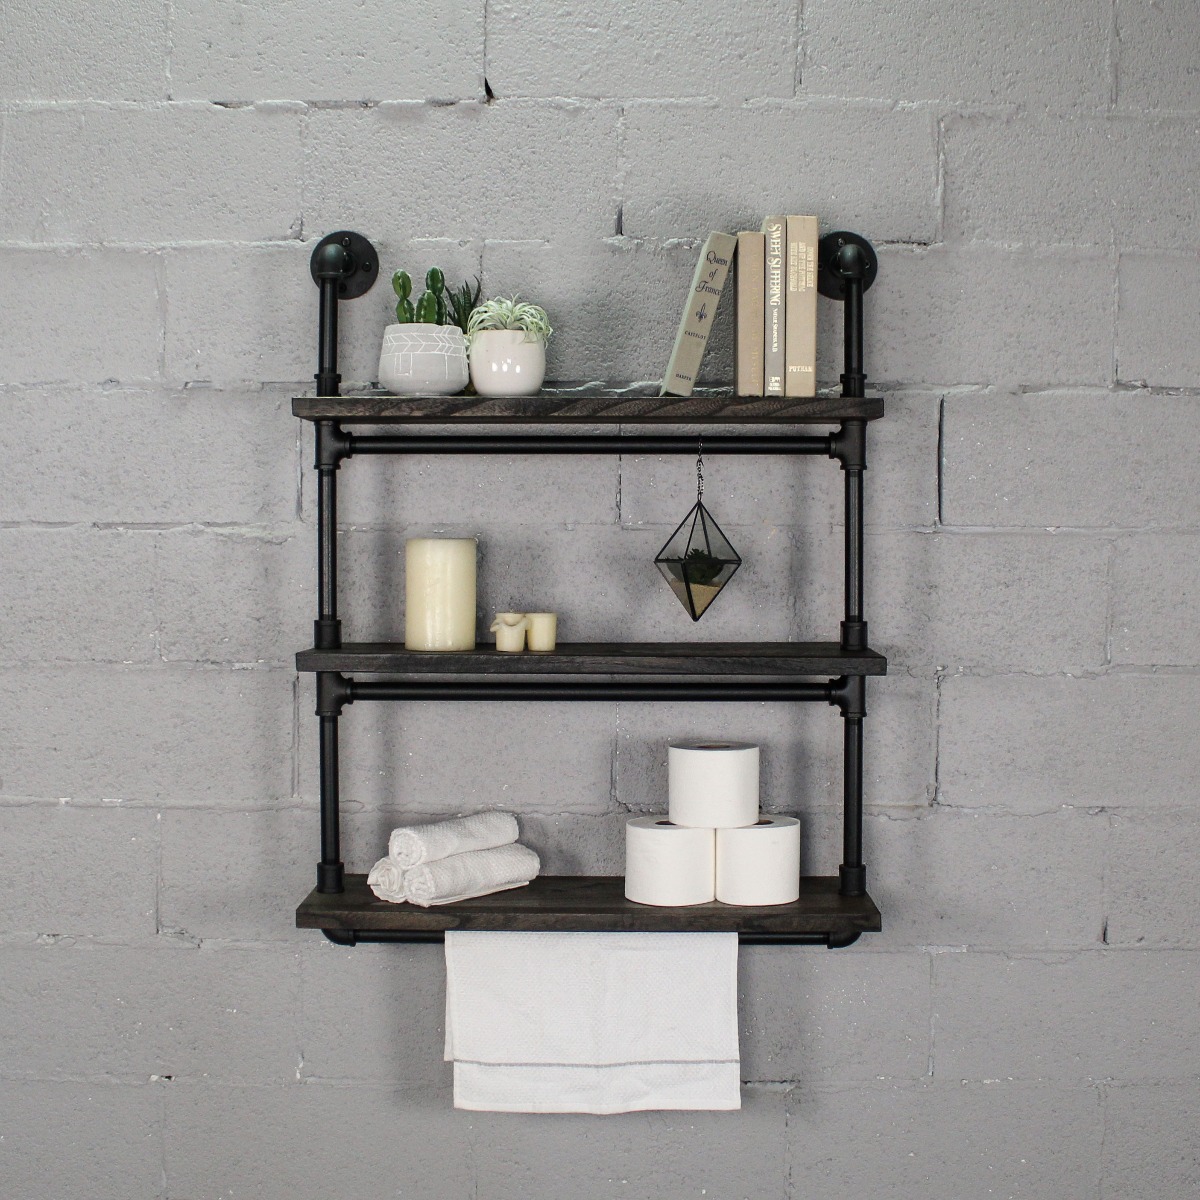 Tts301-bl-bl-bl Juneau Industrial Chic 30 Wide 3-tier Wall Mounted Etagere Bookcase, Black Steel Combo With Dark Brown Stained Wood